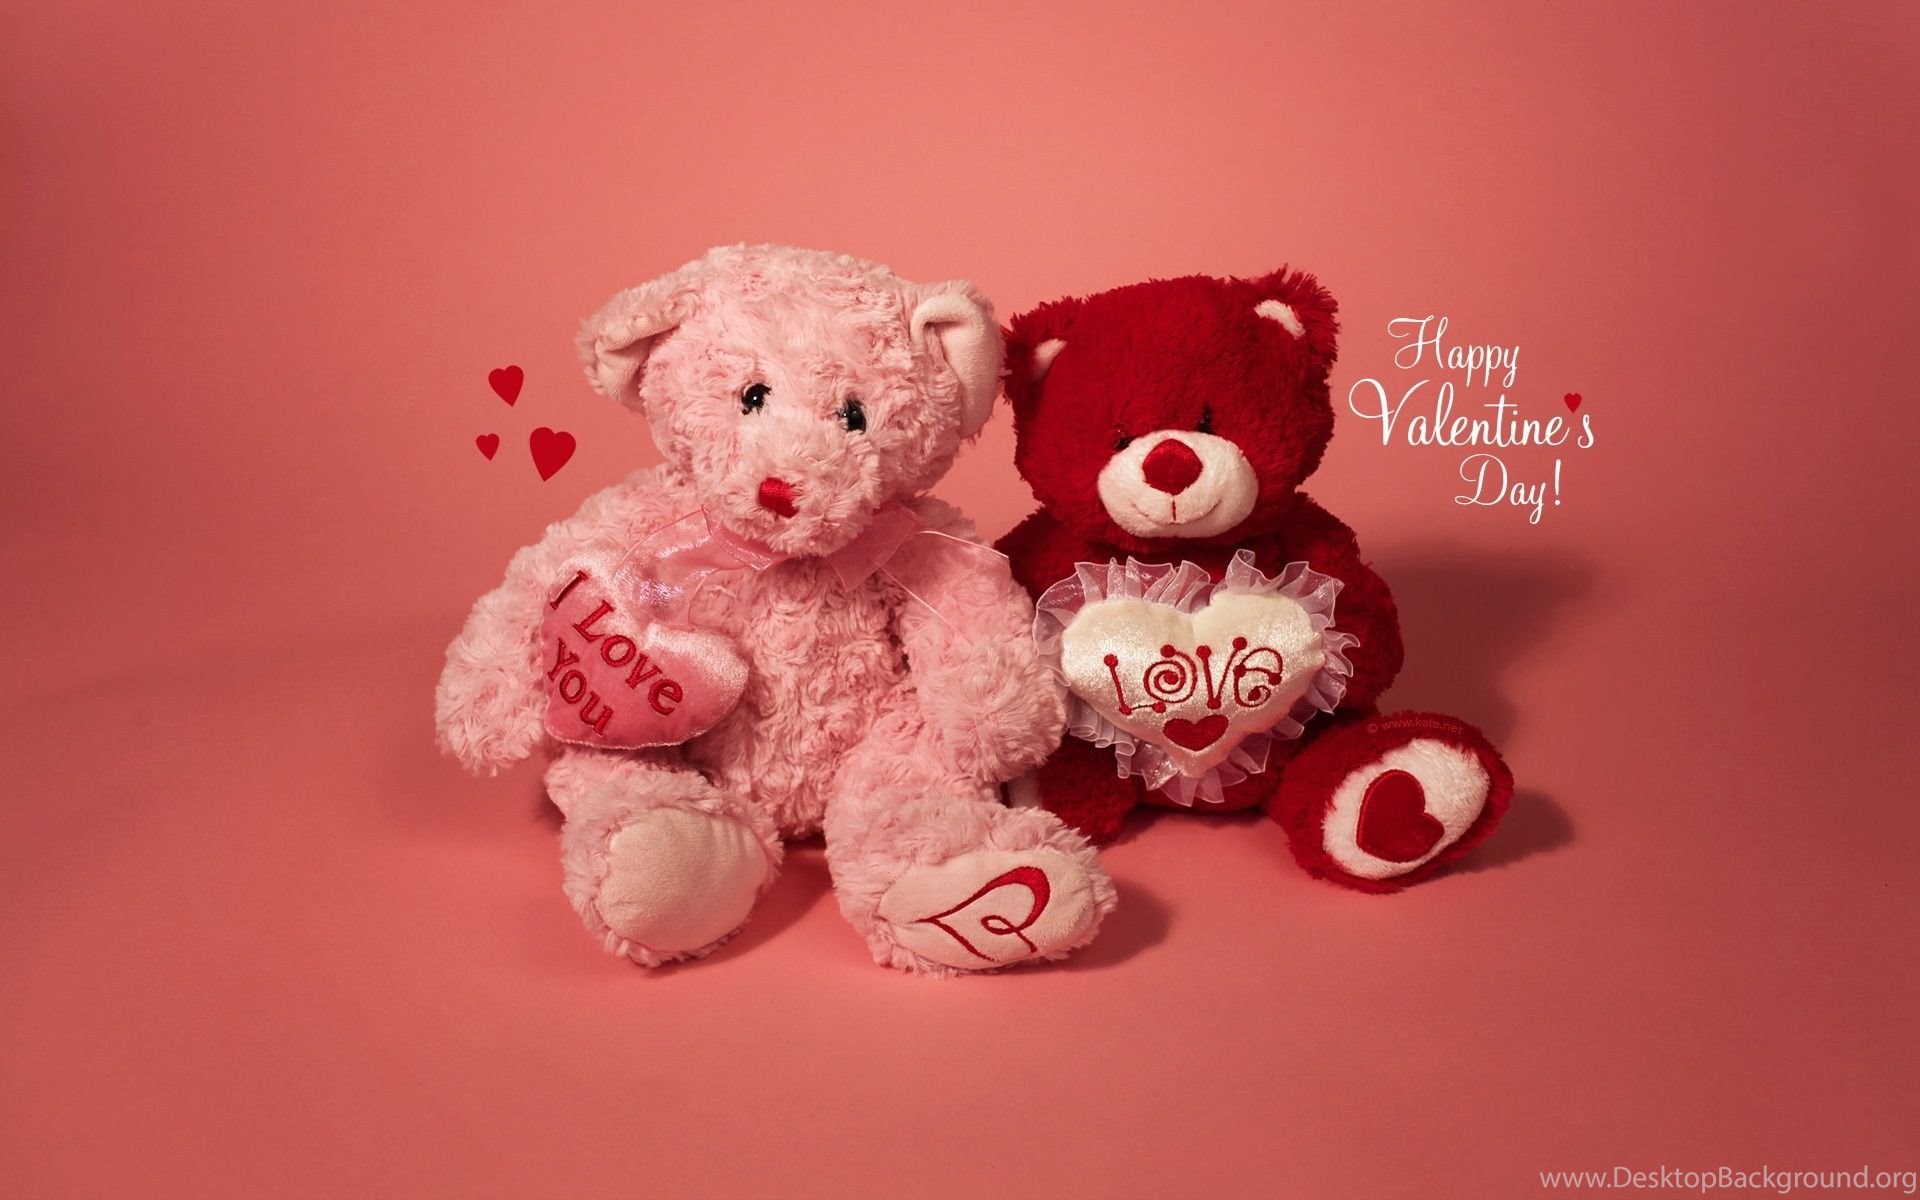 valentines day wallpaper,stuffed toy,teddy bear,red,toy,pink